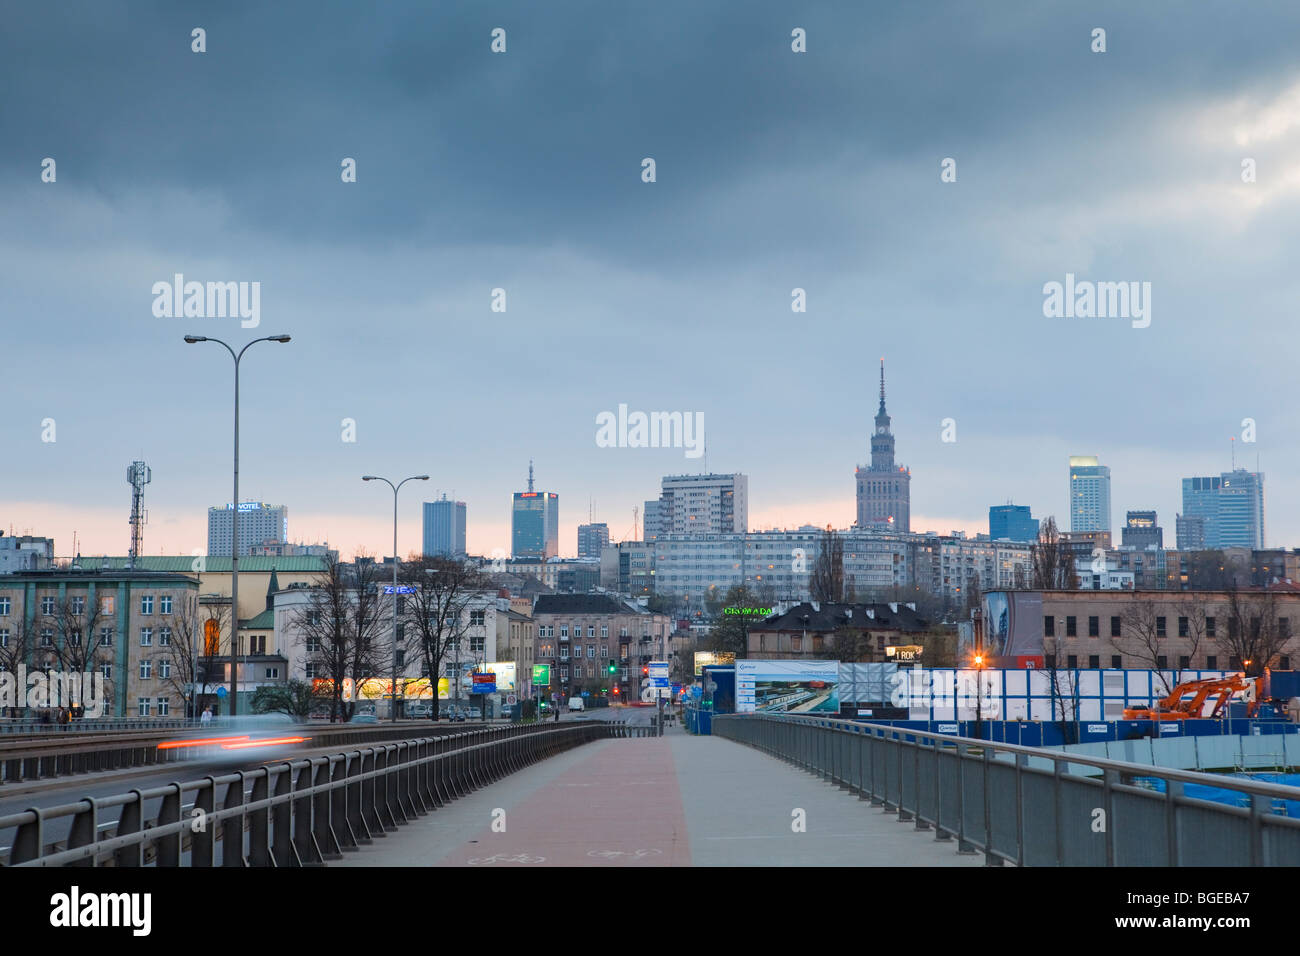 The skyline of Warsaw on a cloudy day. Stock Photo